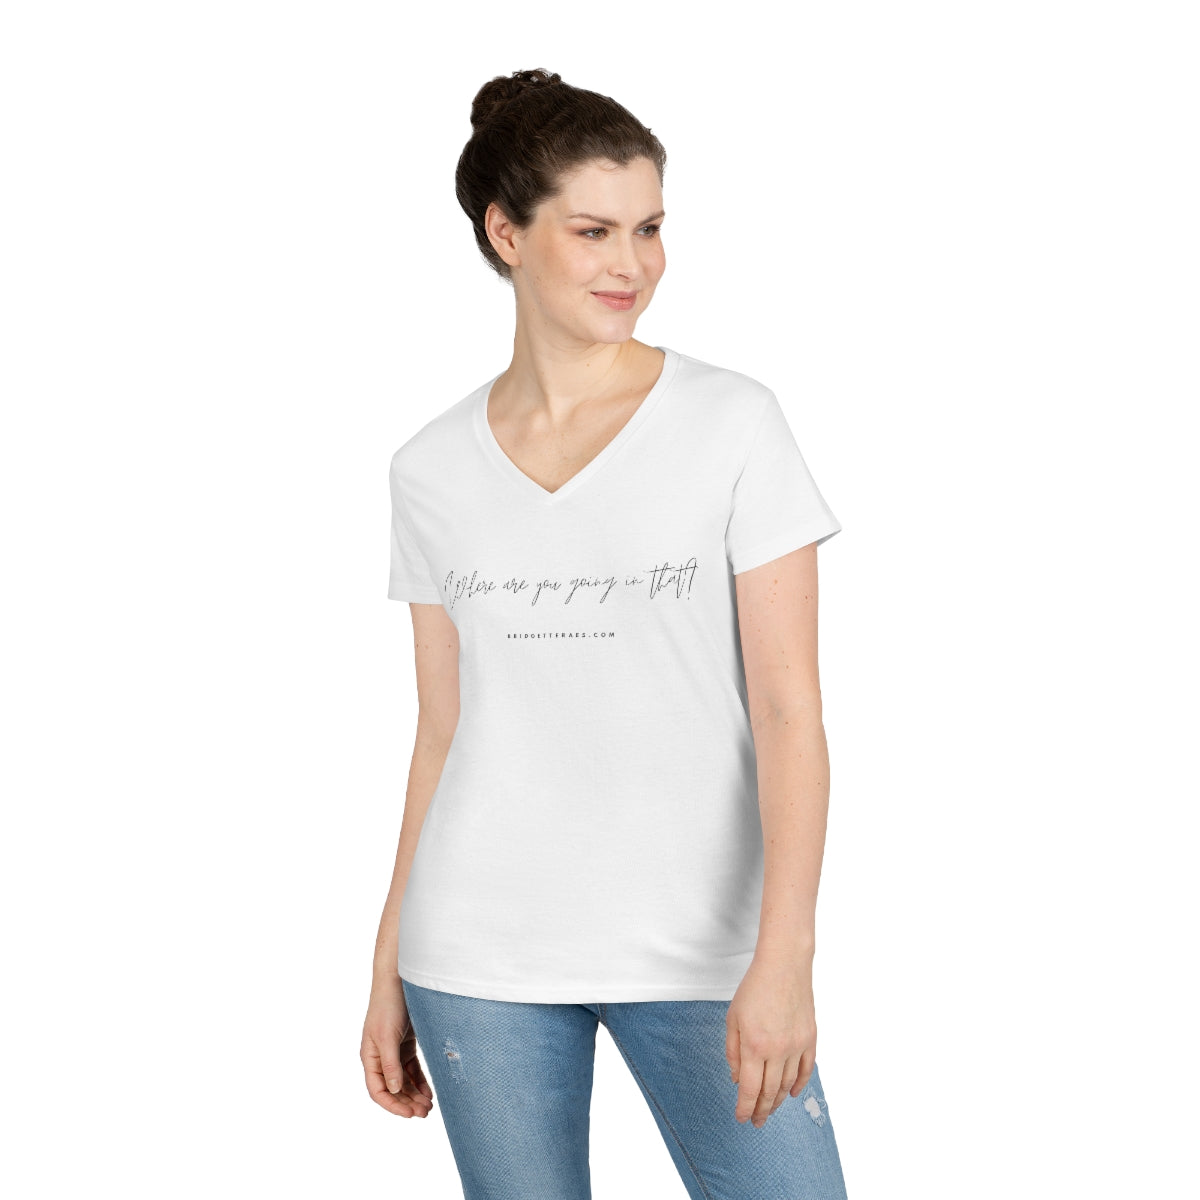 Where Are You Going in That? 100% Cotton V-Neck T-Shirt